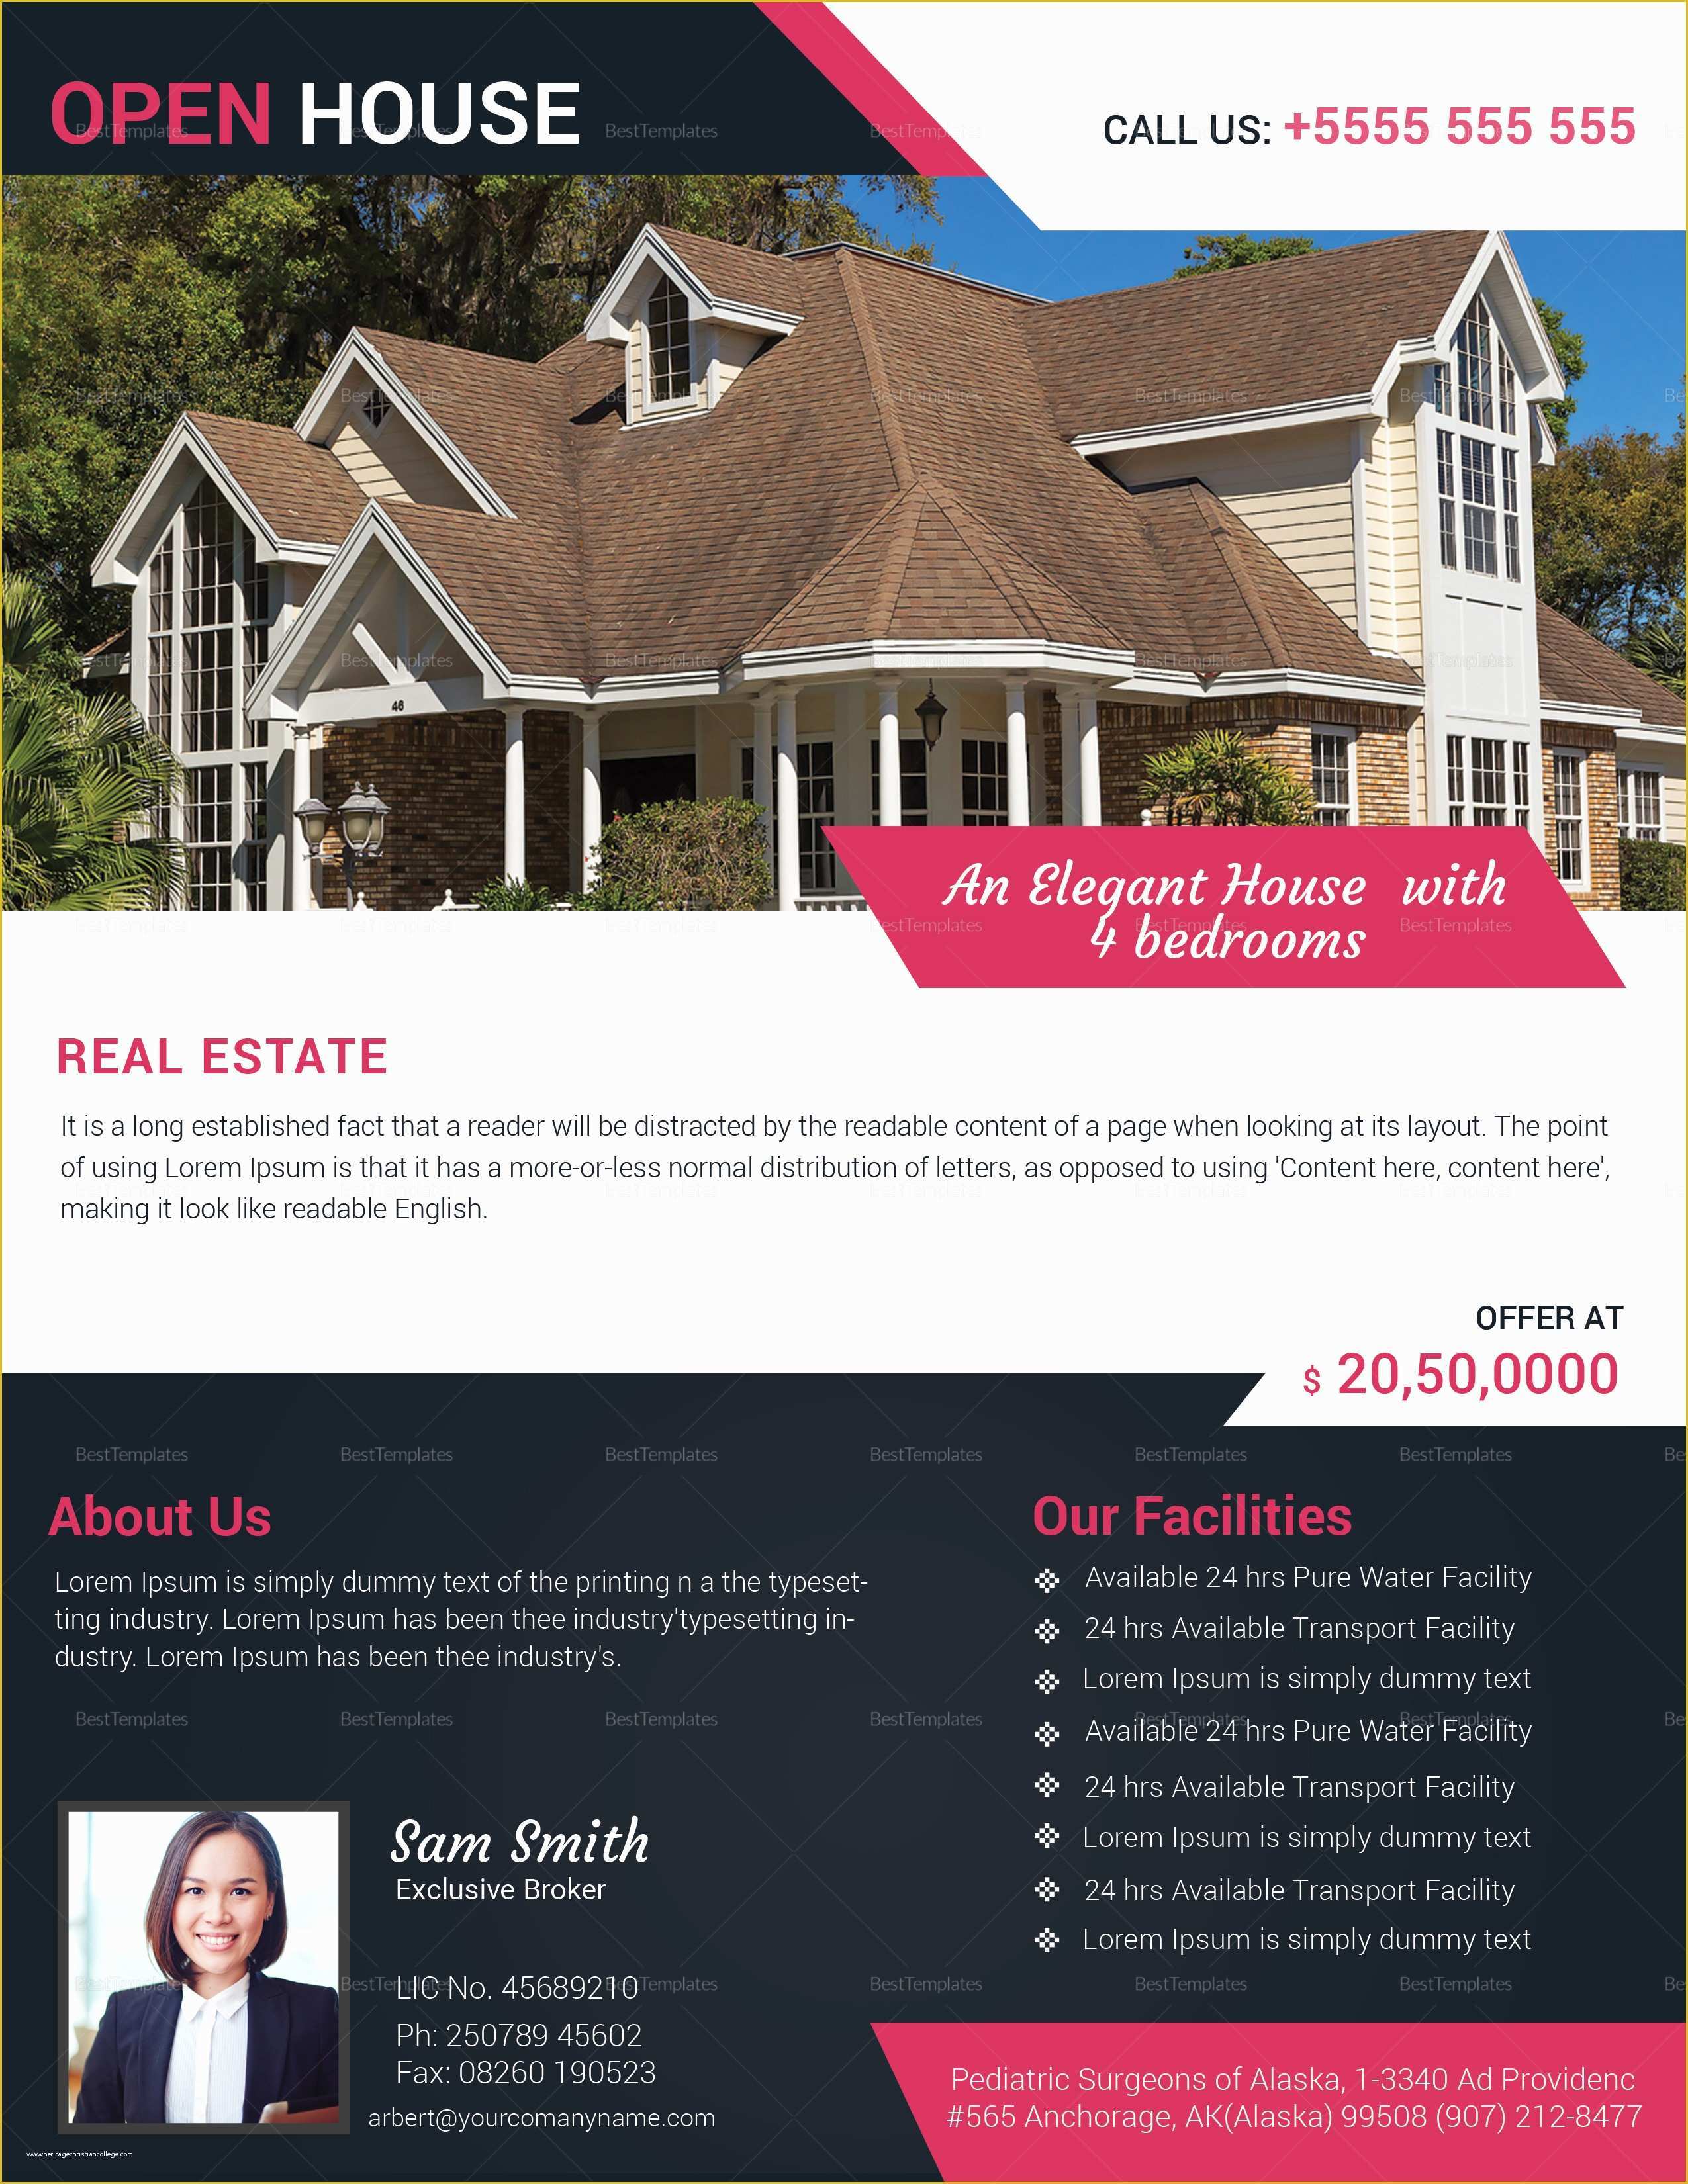 Open House Flyer Template Free Publisher Of Realtor Open House Flyer Design Template In Word Psd